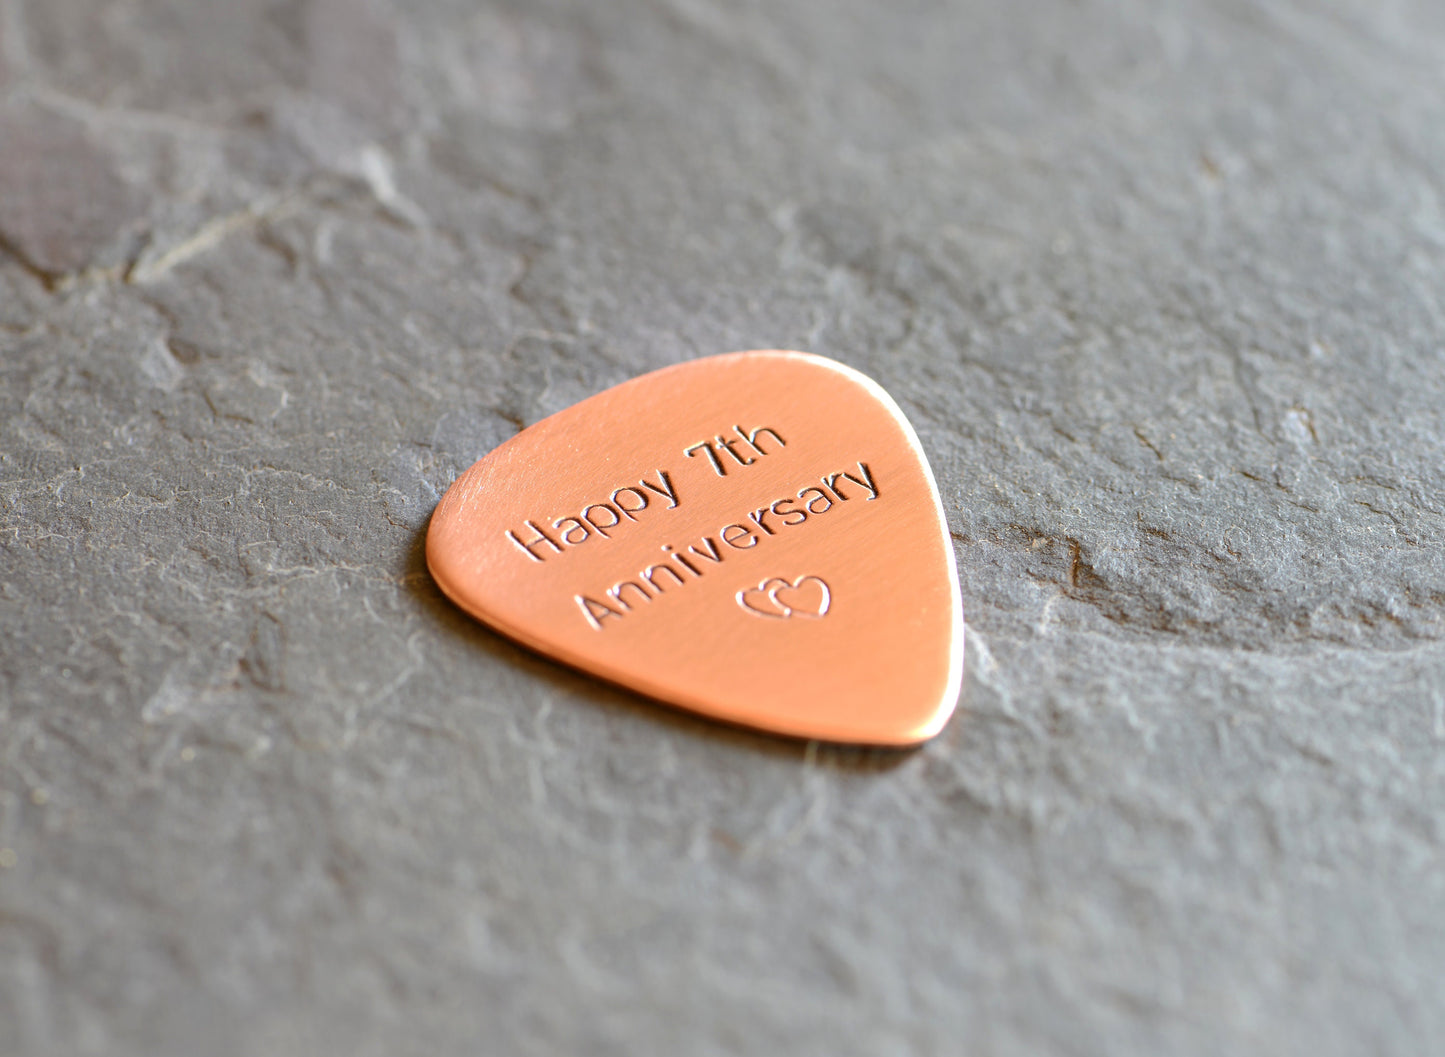 Copper guitar pick for the 7th anniversary or playing your guitar